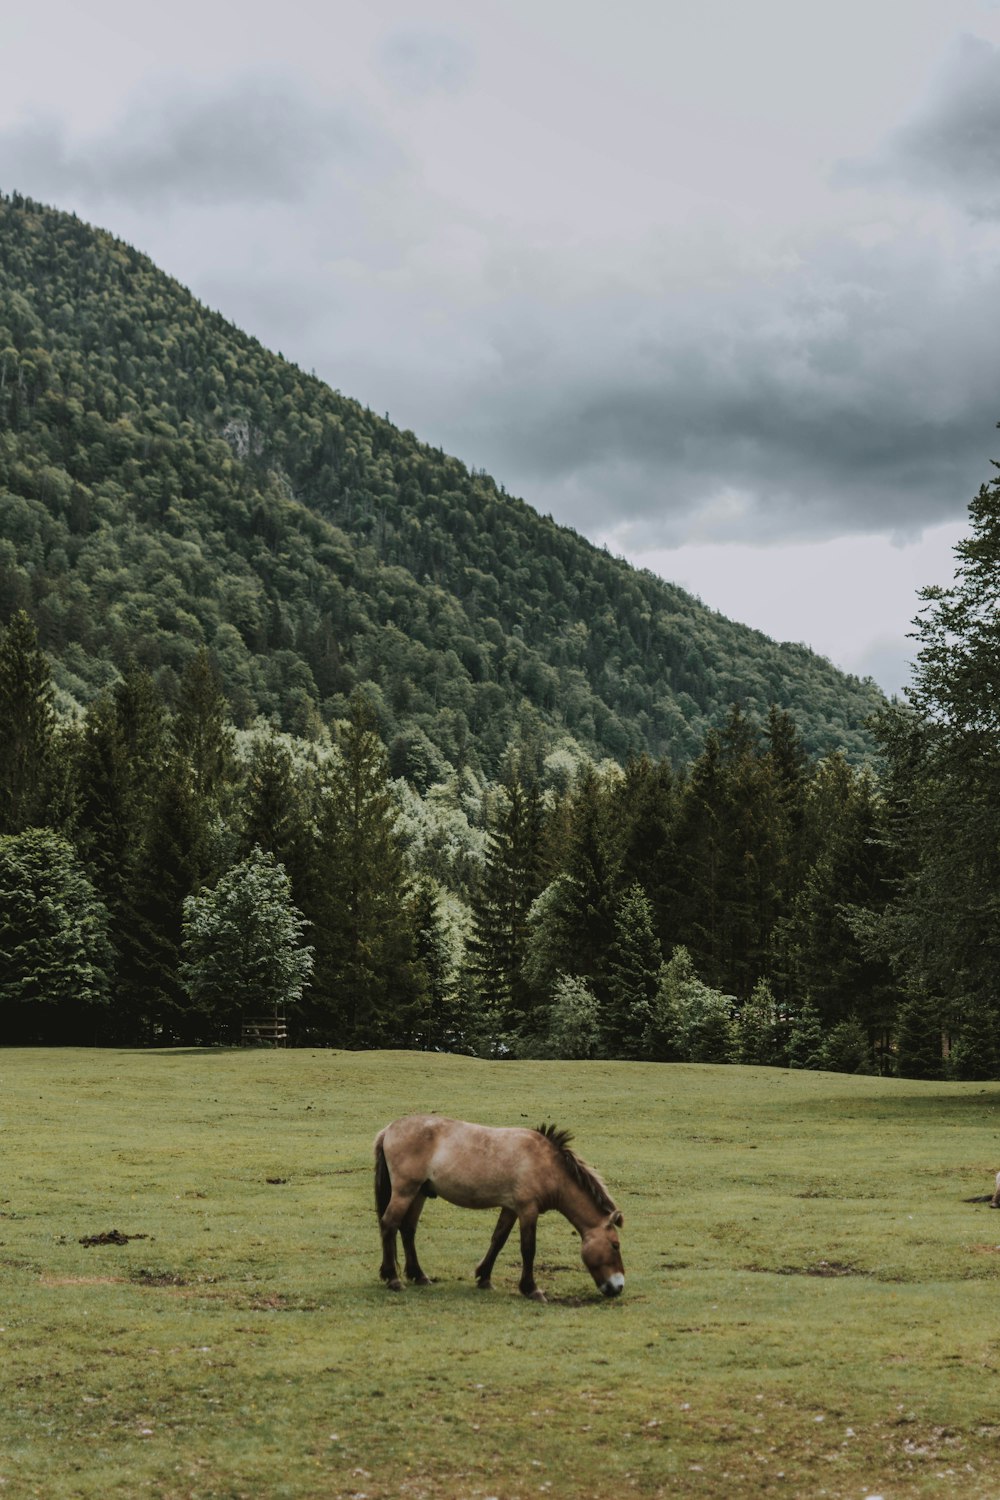 brown horse eating grass near green trees and mountain during daytime